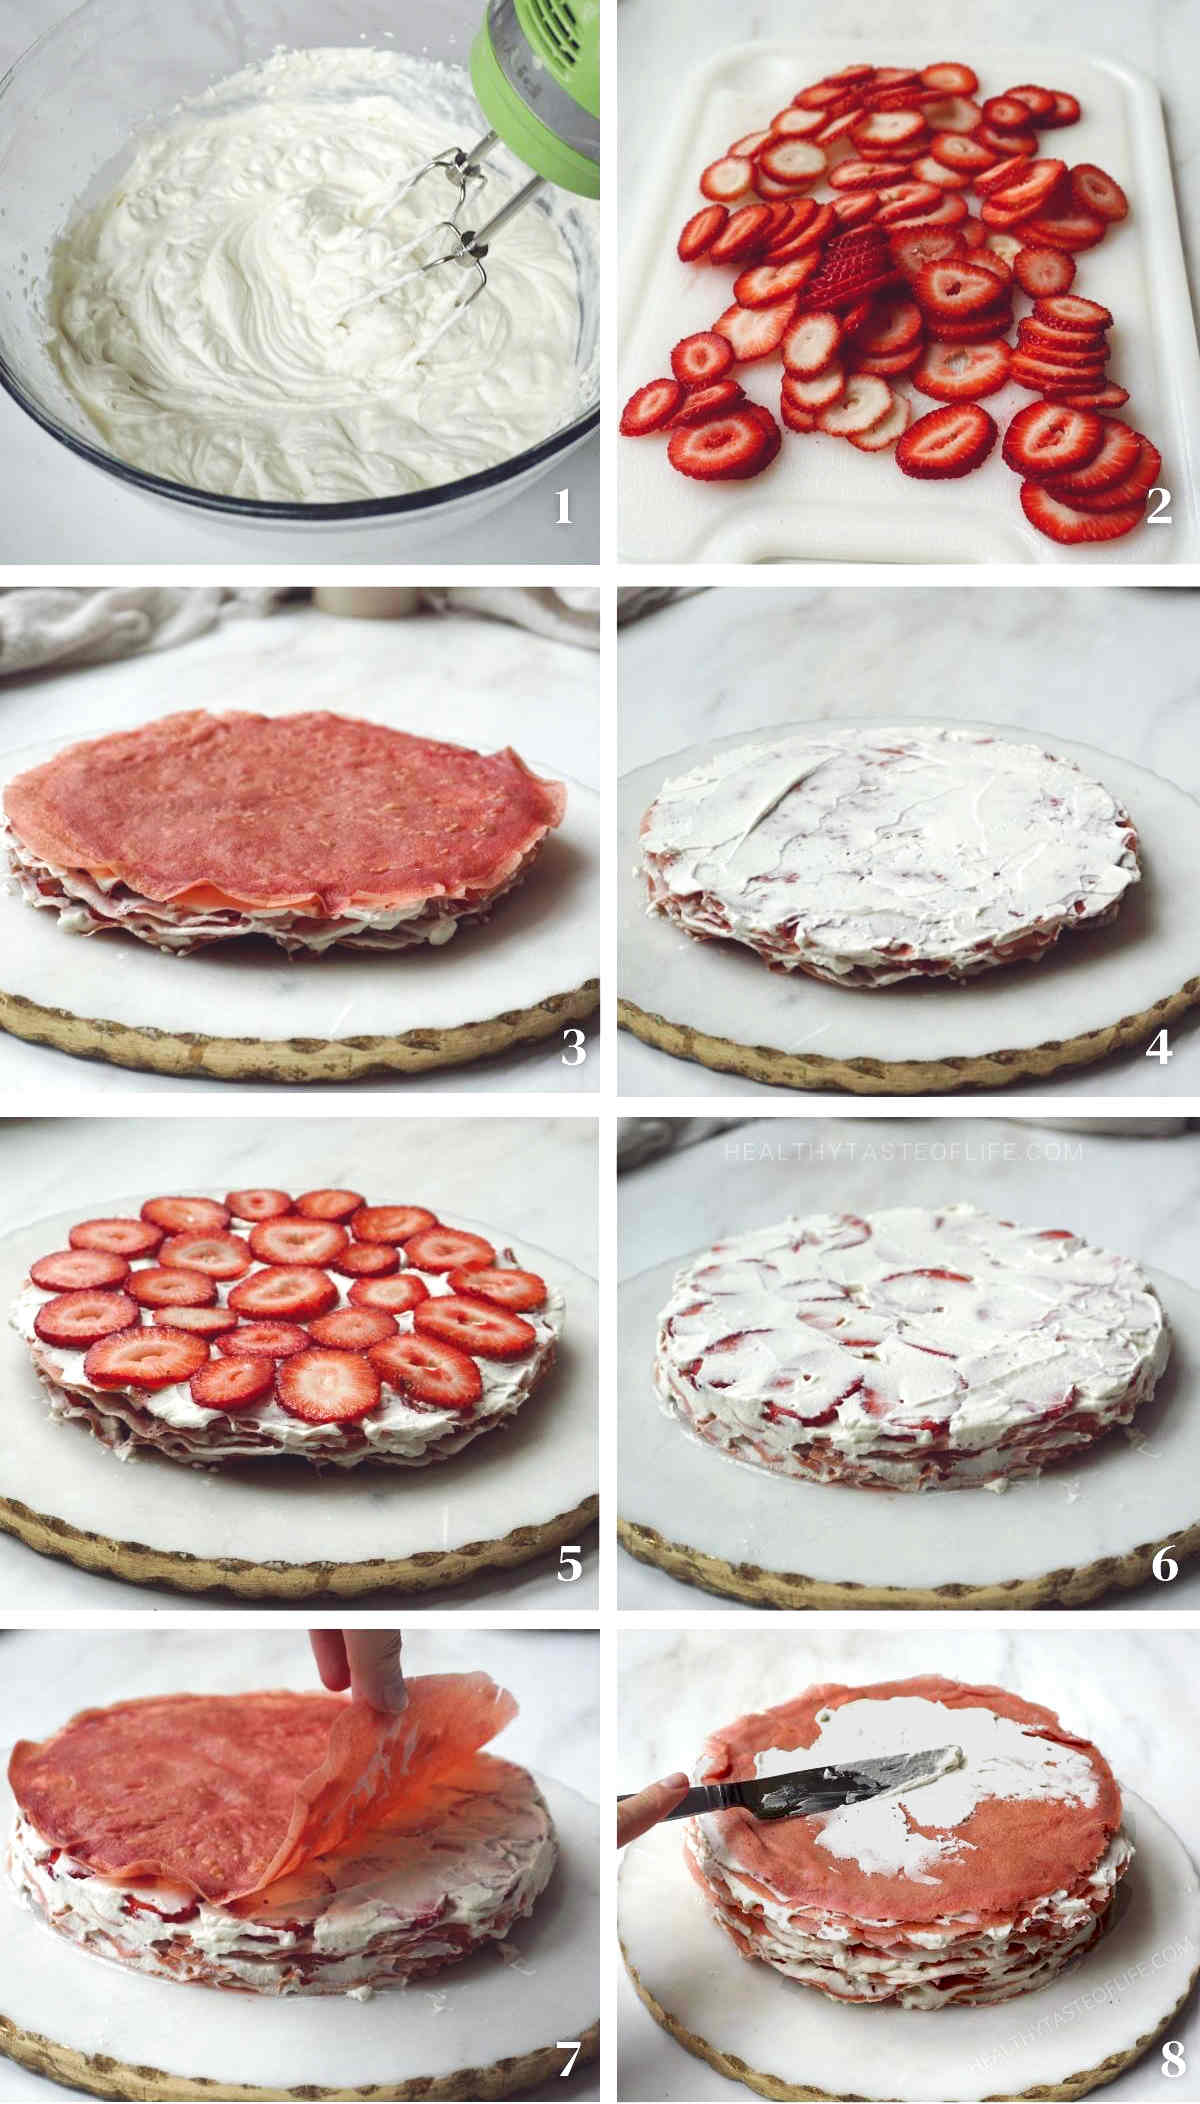 Process shots showing how to assemble the strawberry crepe cake / crepe cake with strawberries.